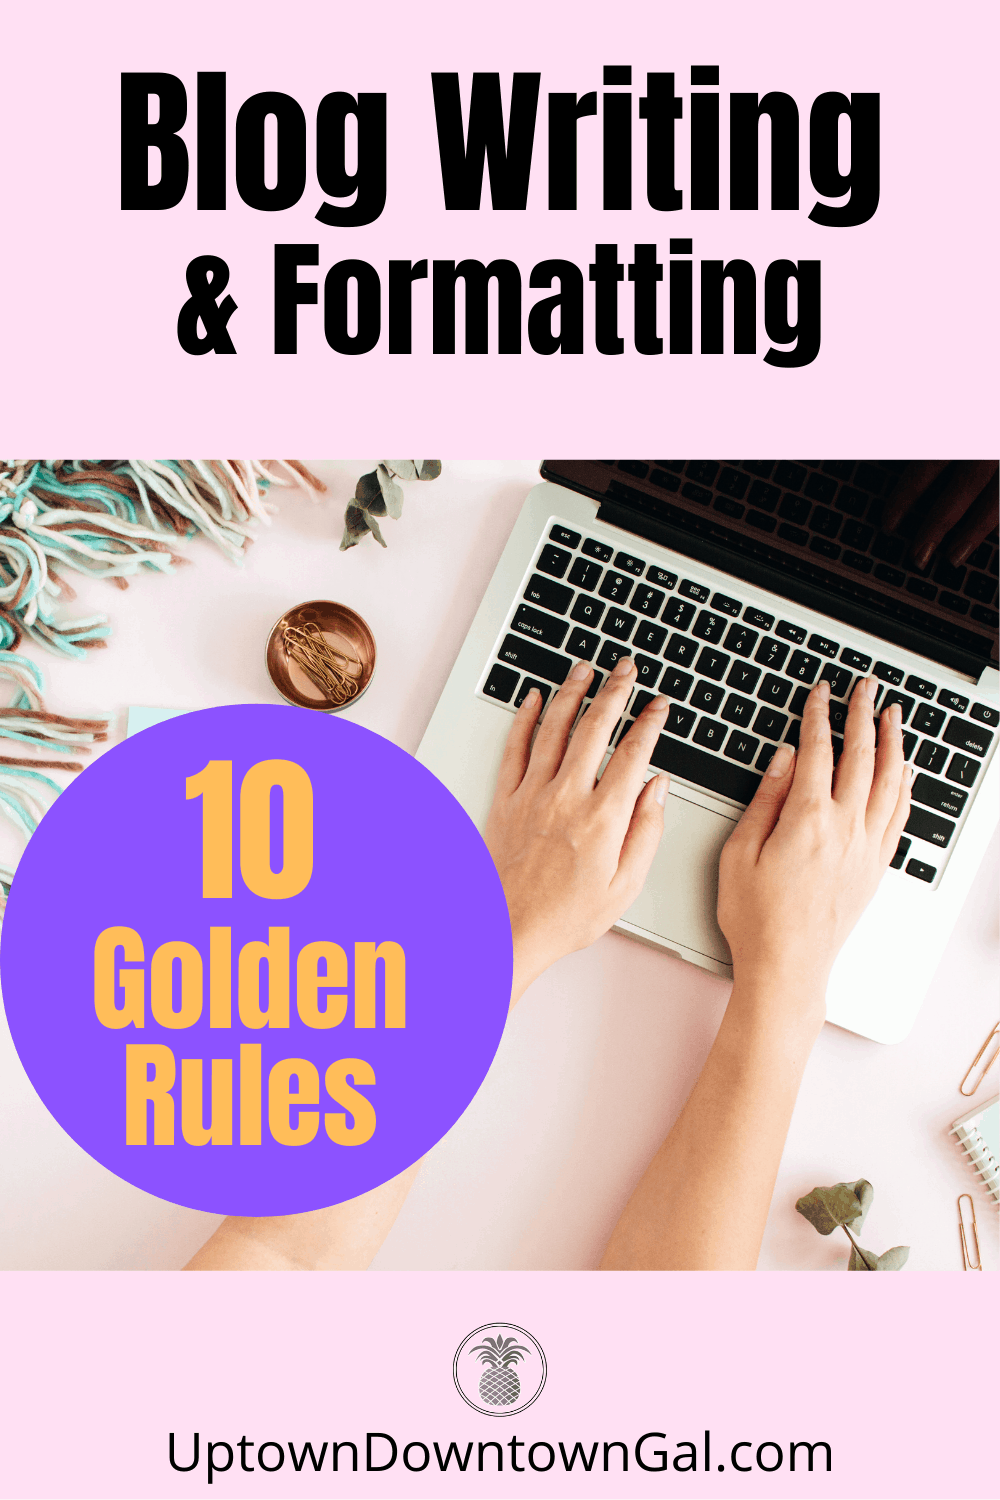 Golden Rules for Writing Blogs